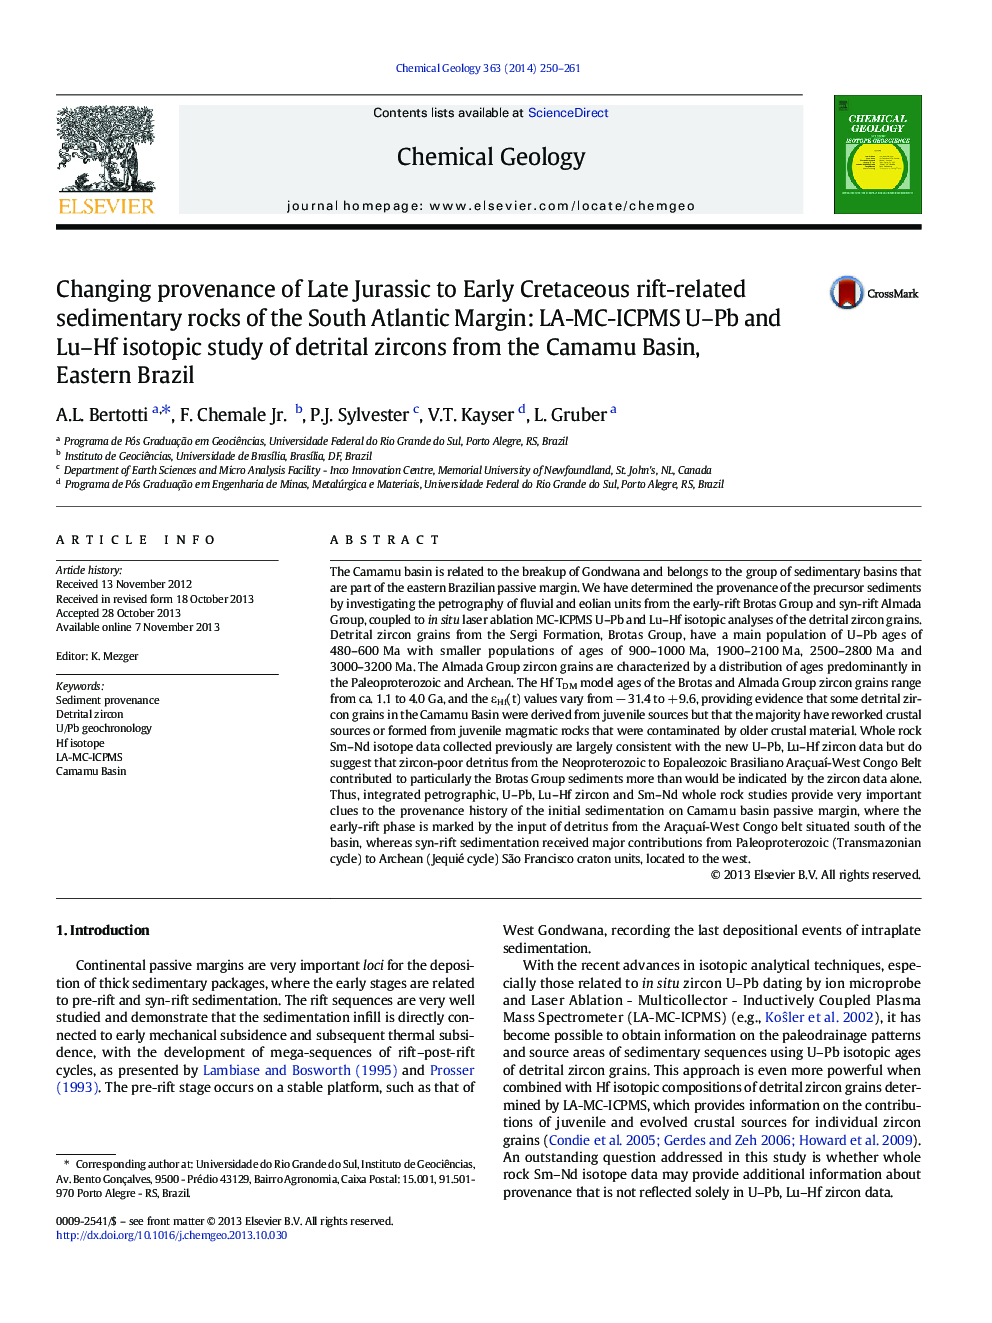 Changing provenance of Late Jurassic to Early Cretaceous rift-related sedimentary rocks of the South Atlantic Margin: LA-MC-ICPMS U-Pb and Lu-Hf isotopic study of detrital zircons from the Camamu Basin, Eastern Brazil